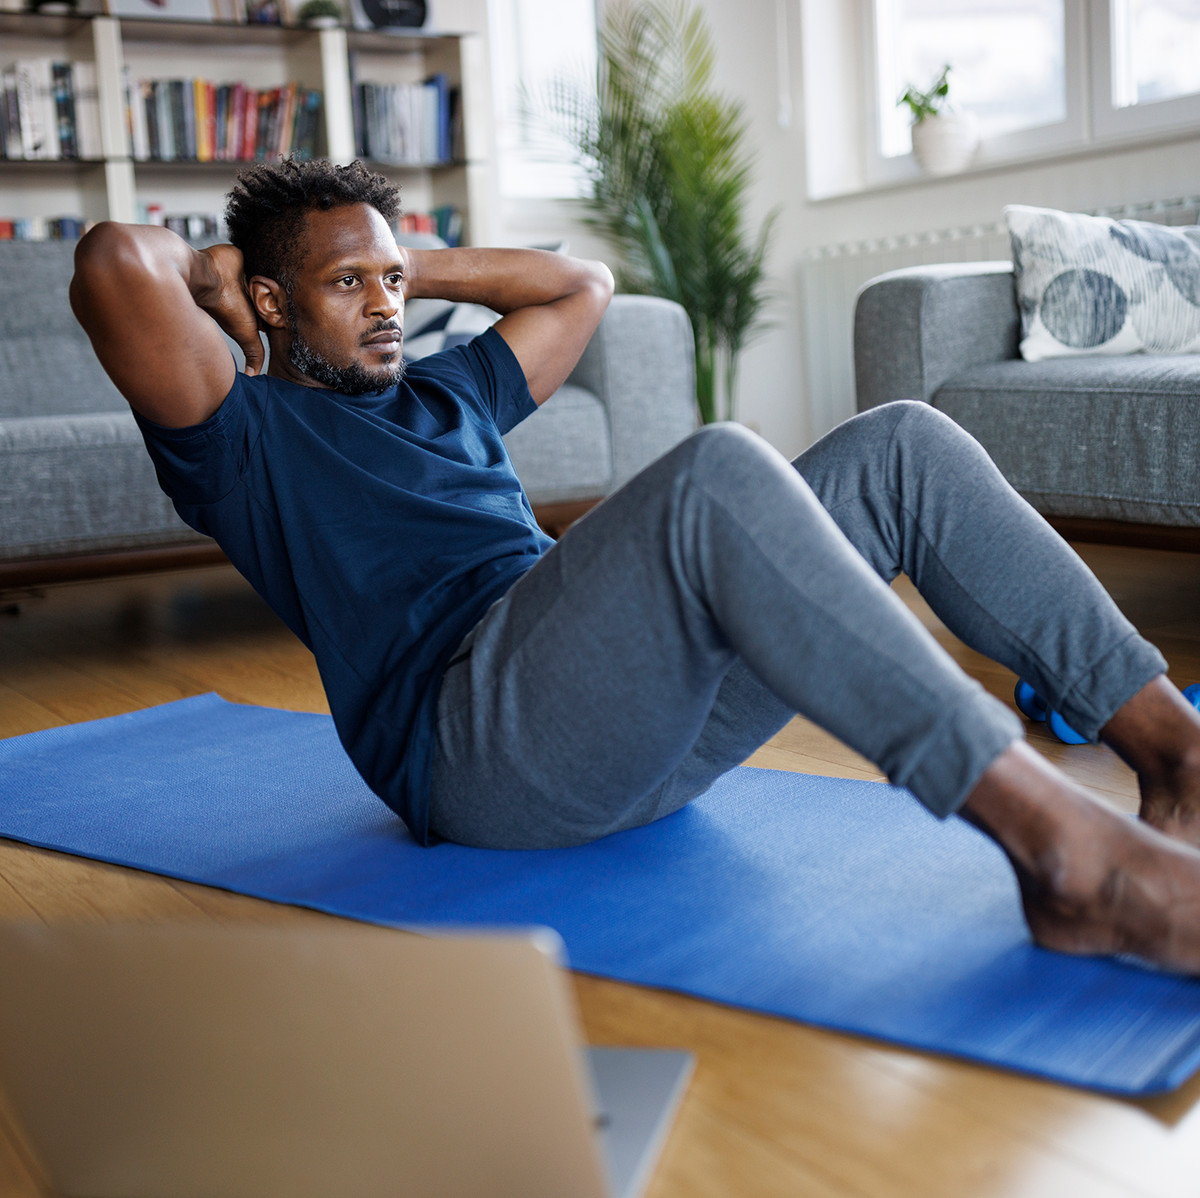 Core workouts at home: Try these beginner workouts & exercises